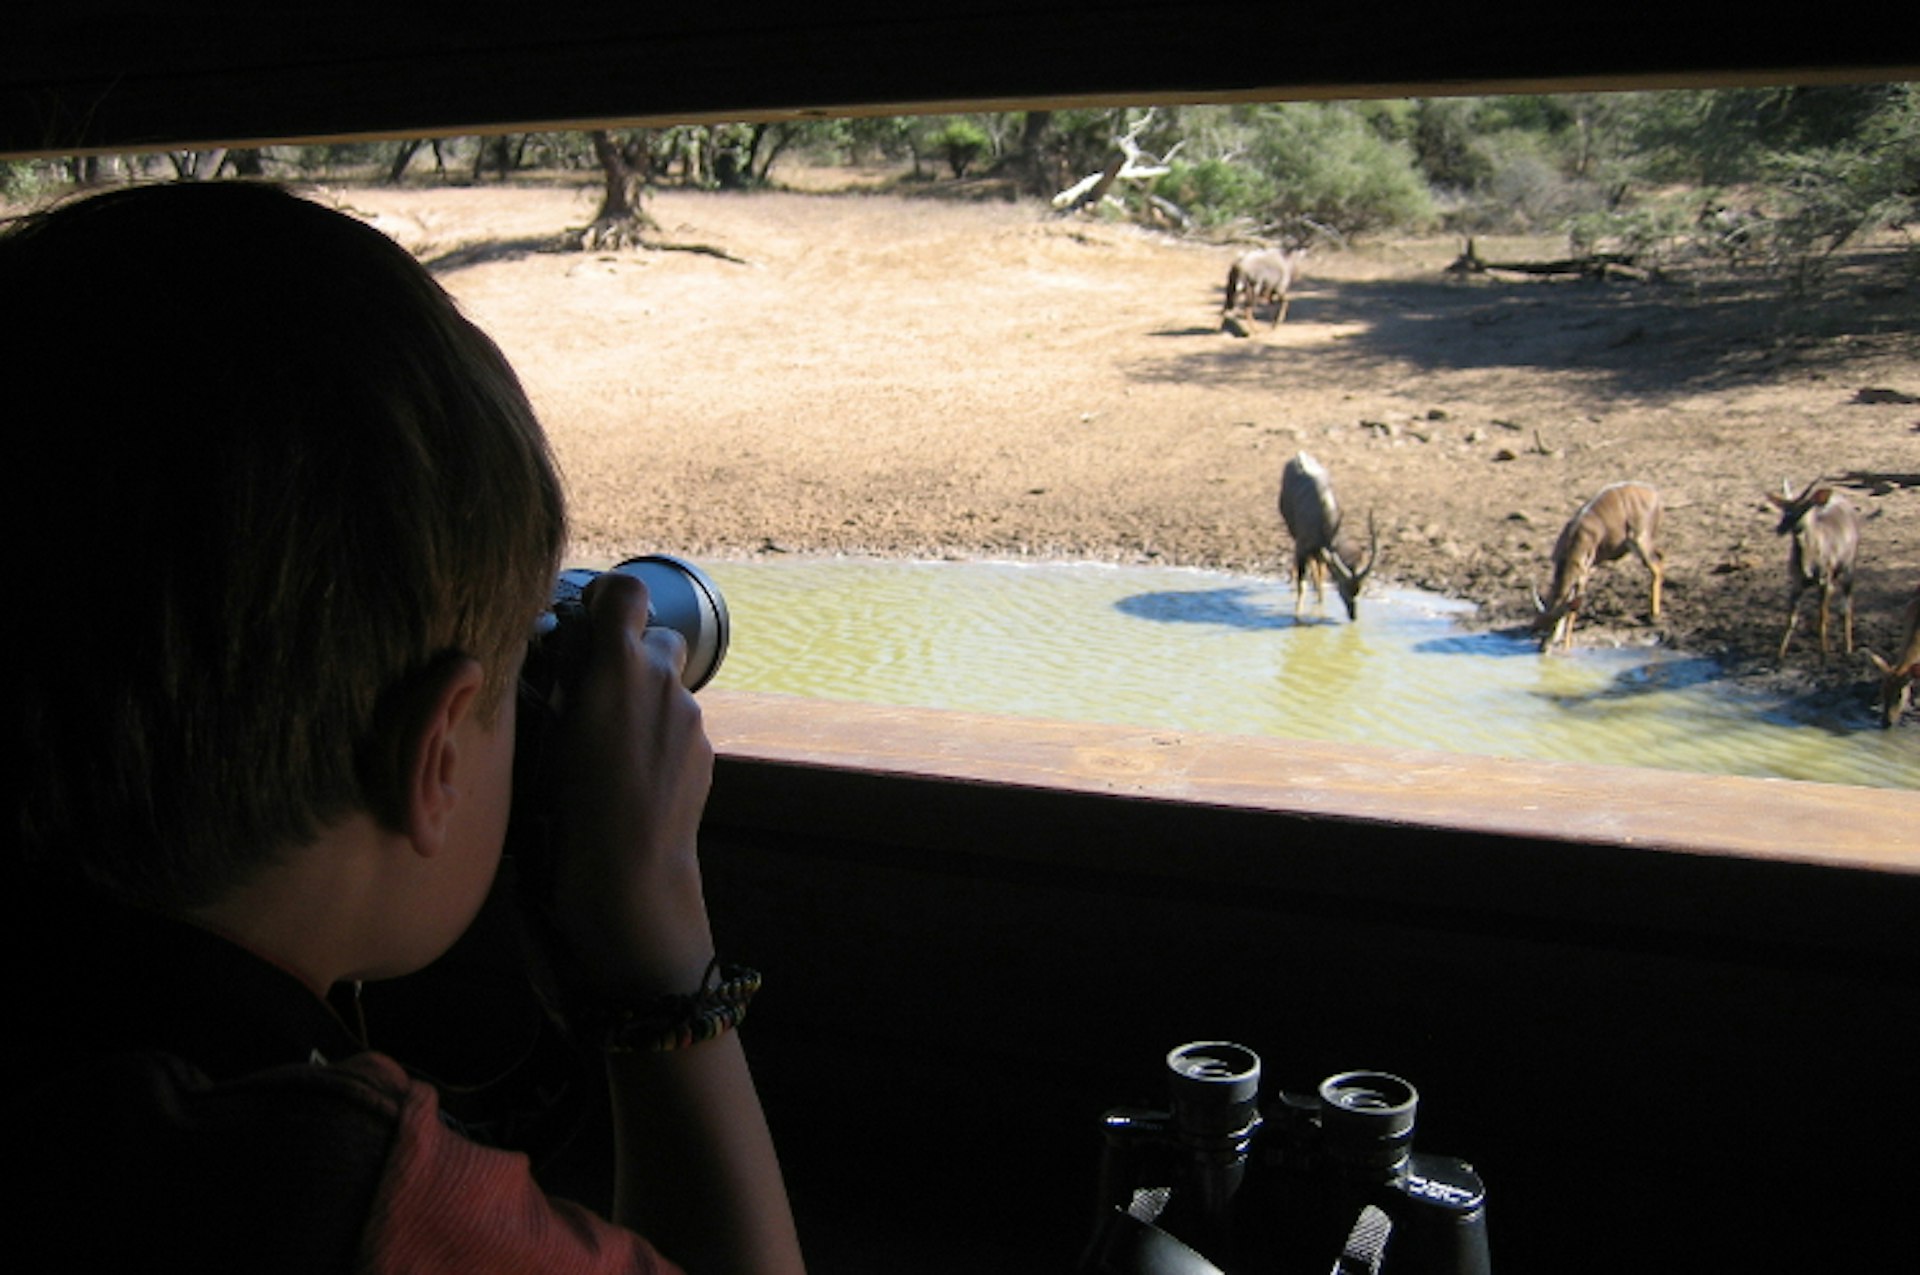 The hides at uMkhuze Game Reserve allow up close wildlife viewing and photography. Image by David Else / Lonely Planet 